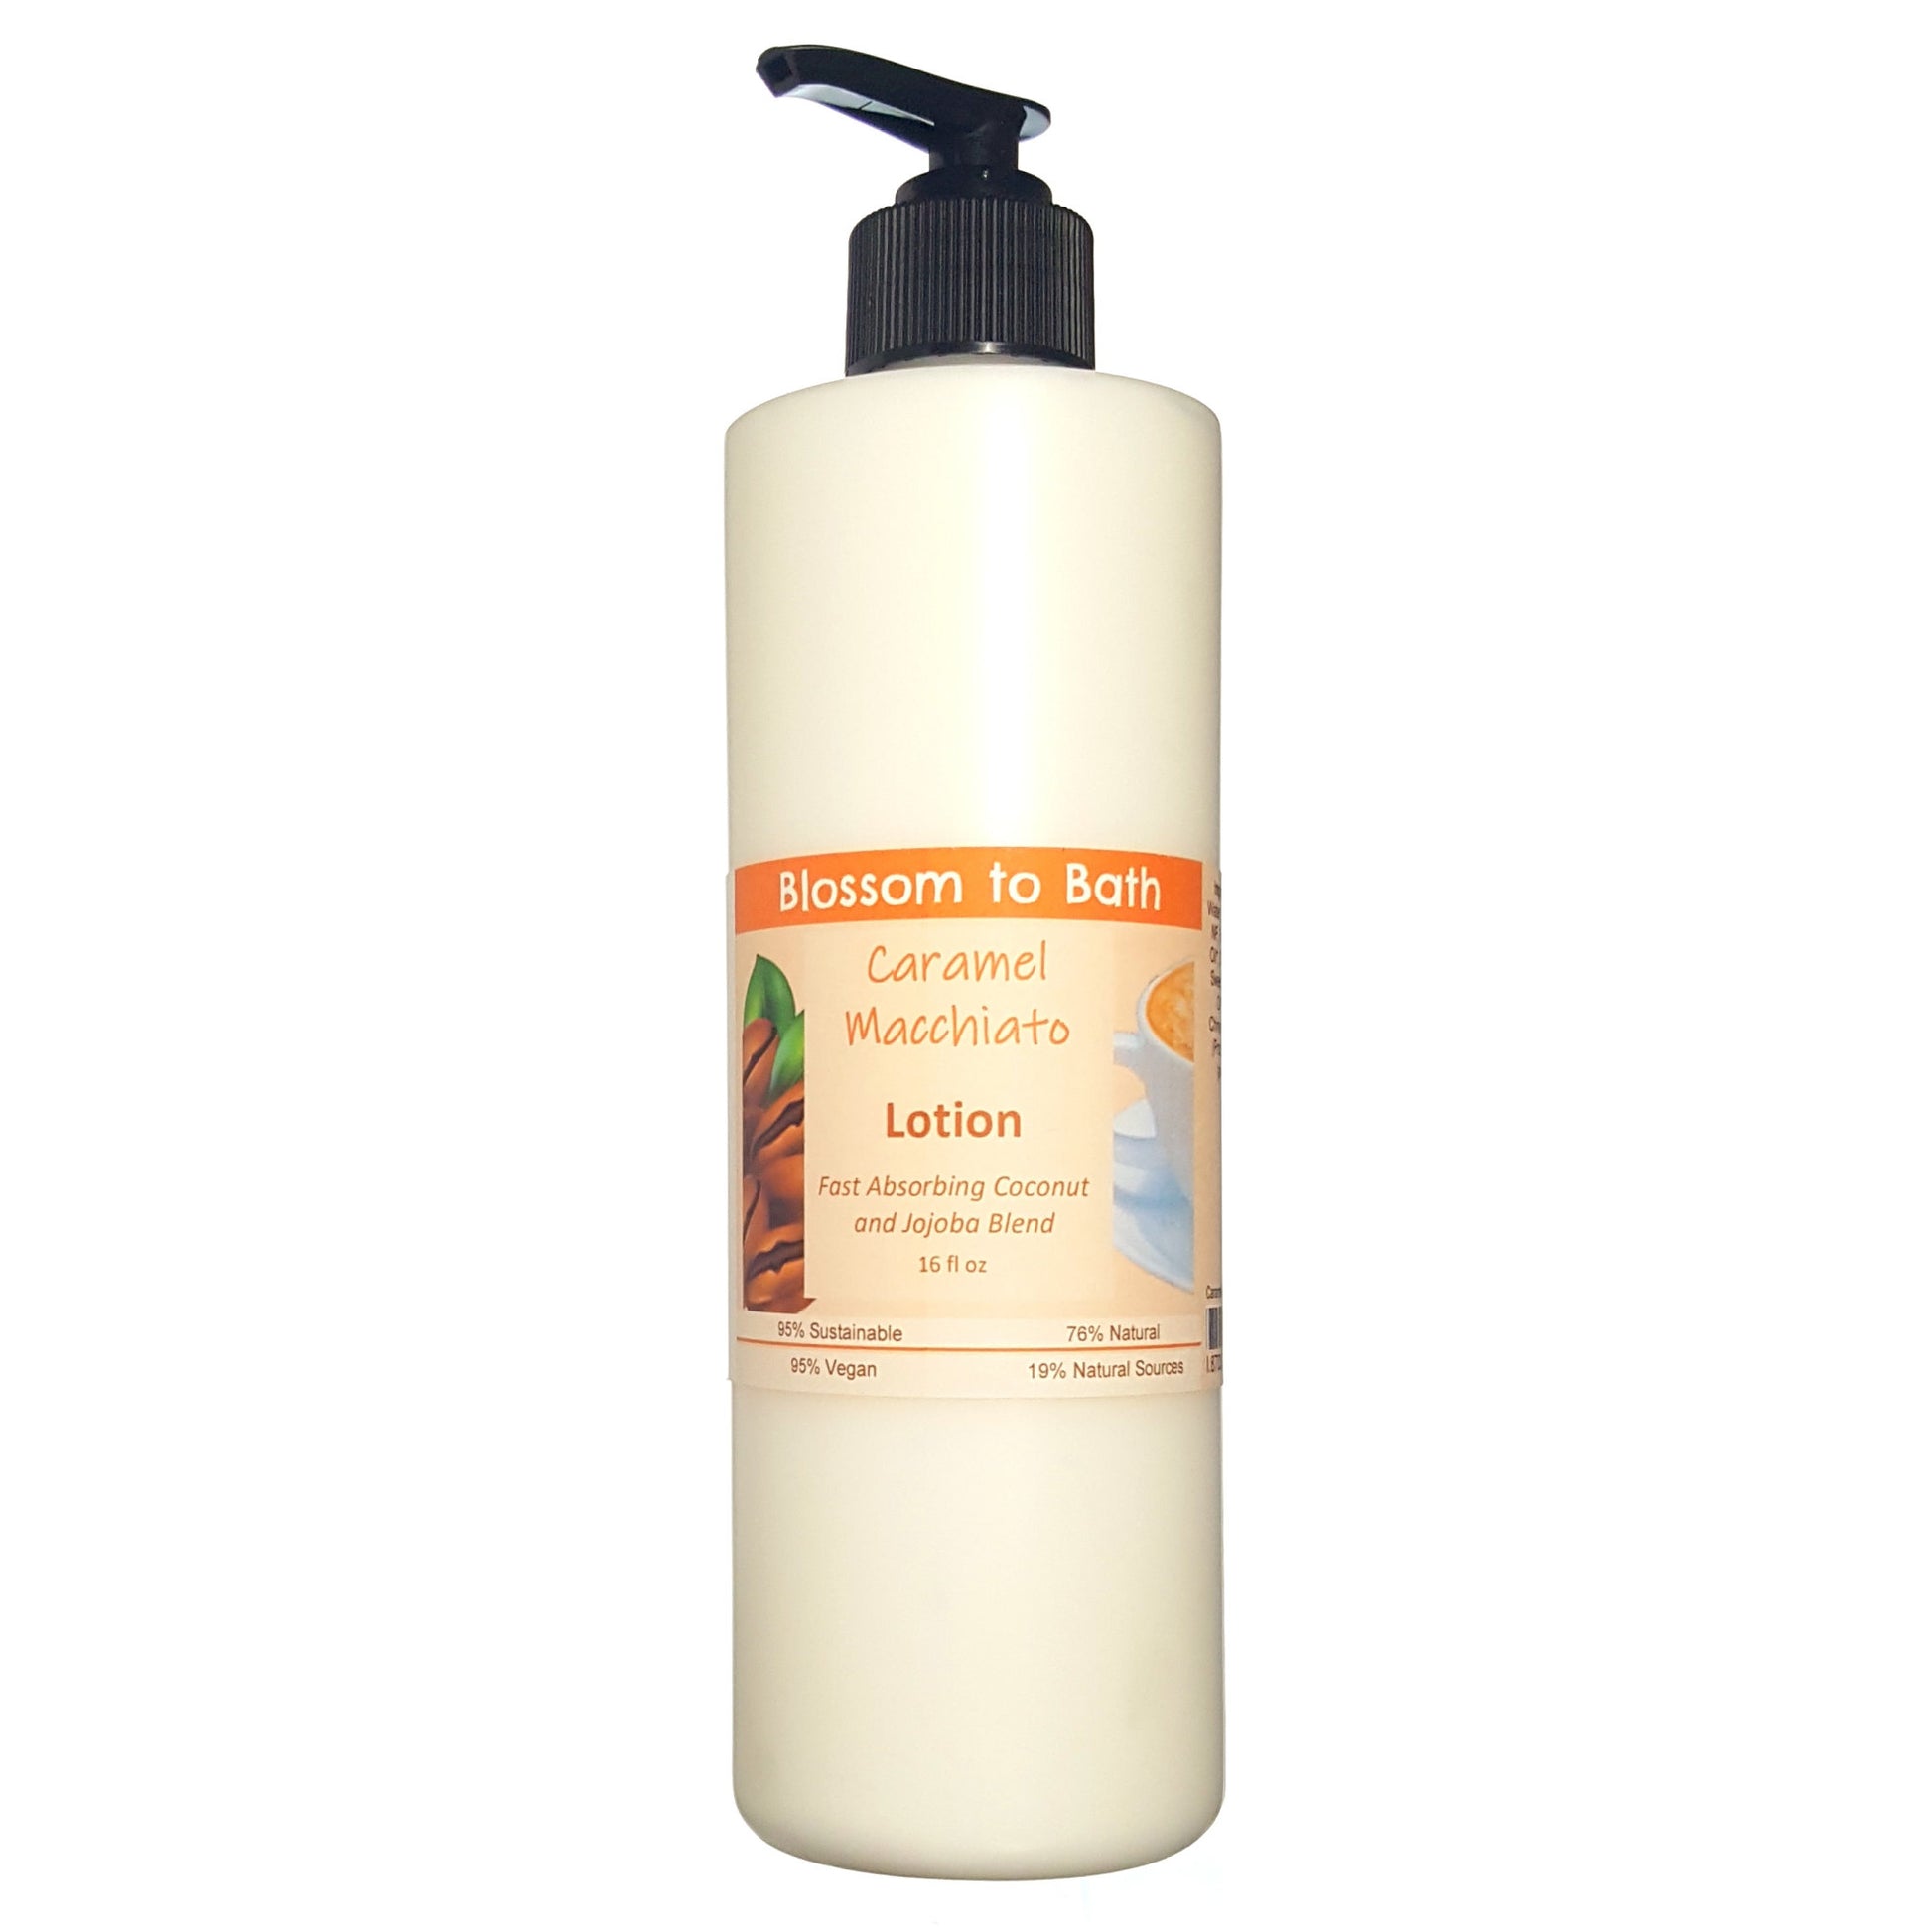 Buy Blossom to Bath Caramel Macchiato Lotion from Flowersong Soap Studio.  Daily moisture luxury that soaks in quickly made with organic oils and butters that soften and smooth the skin  Luscious vanilla and warm rich caramel - a gourmet coffee experience with sweet caramel in a bed of vibrant coffee;